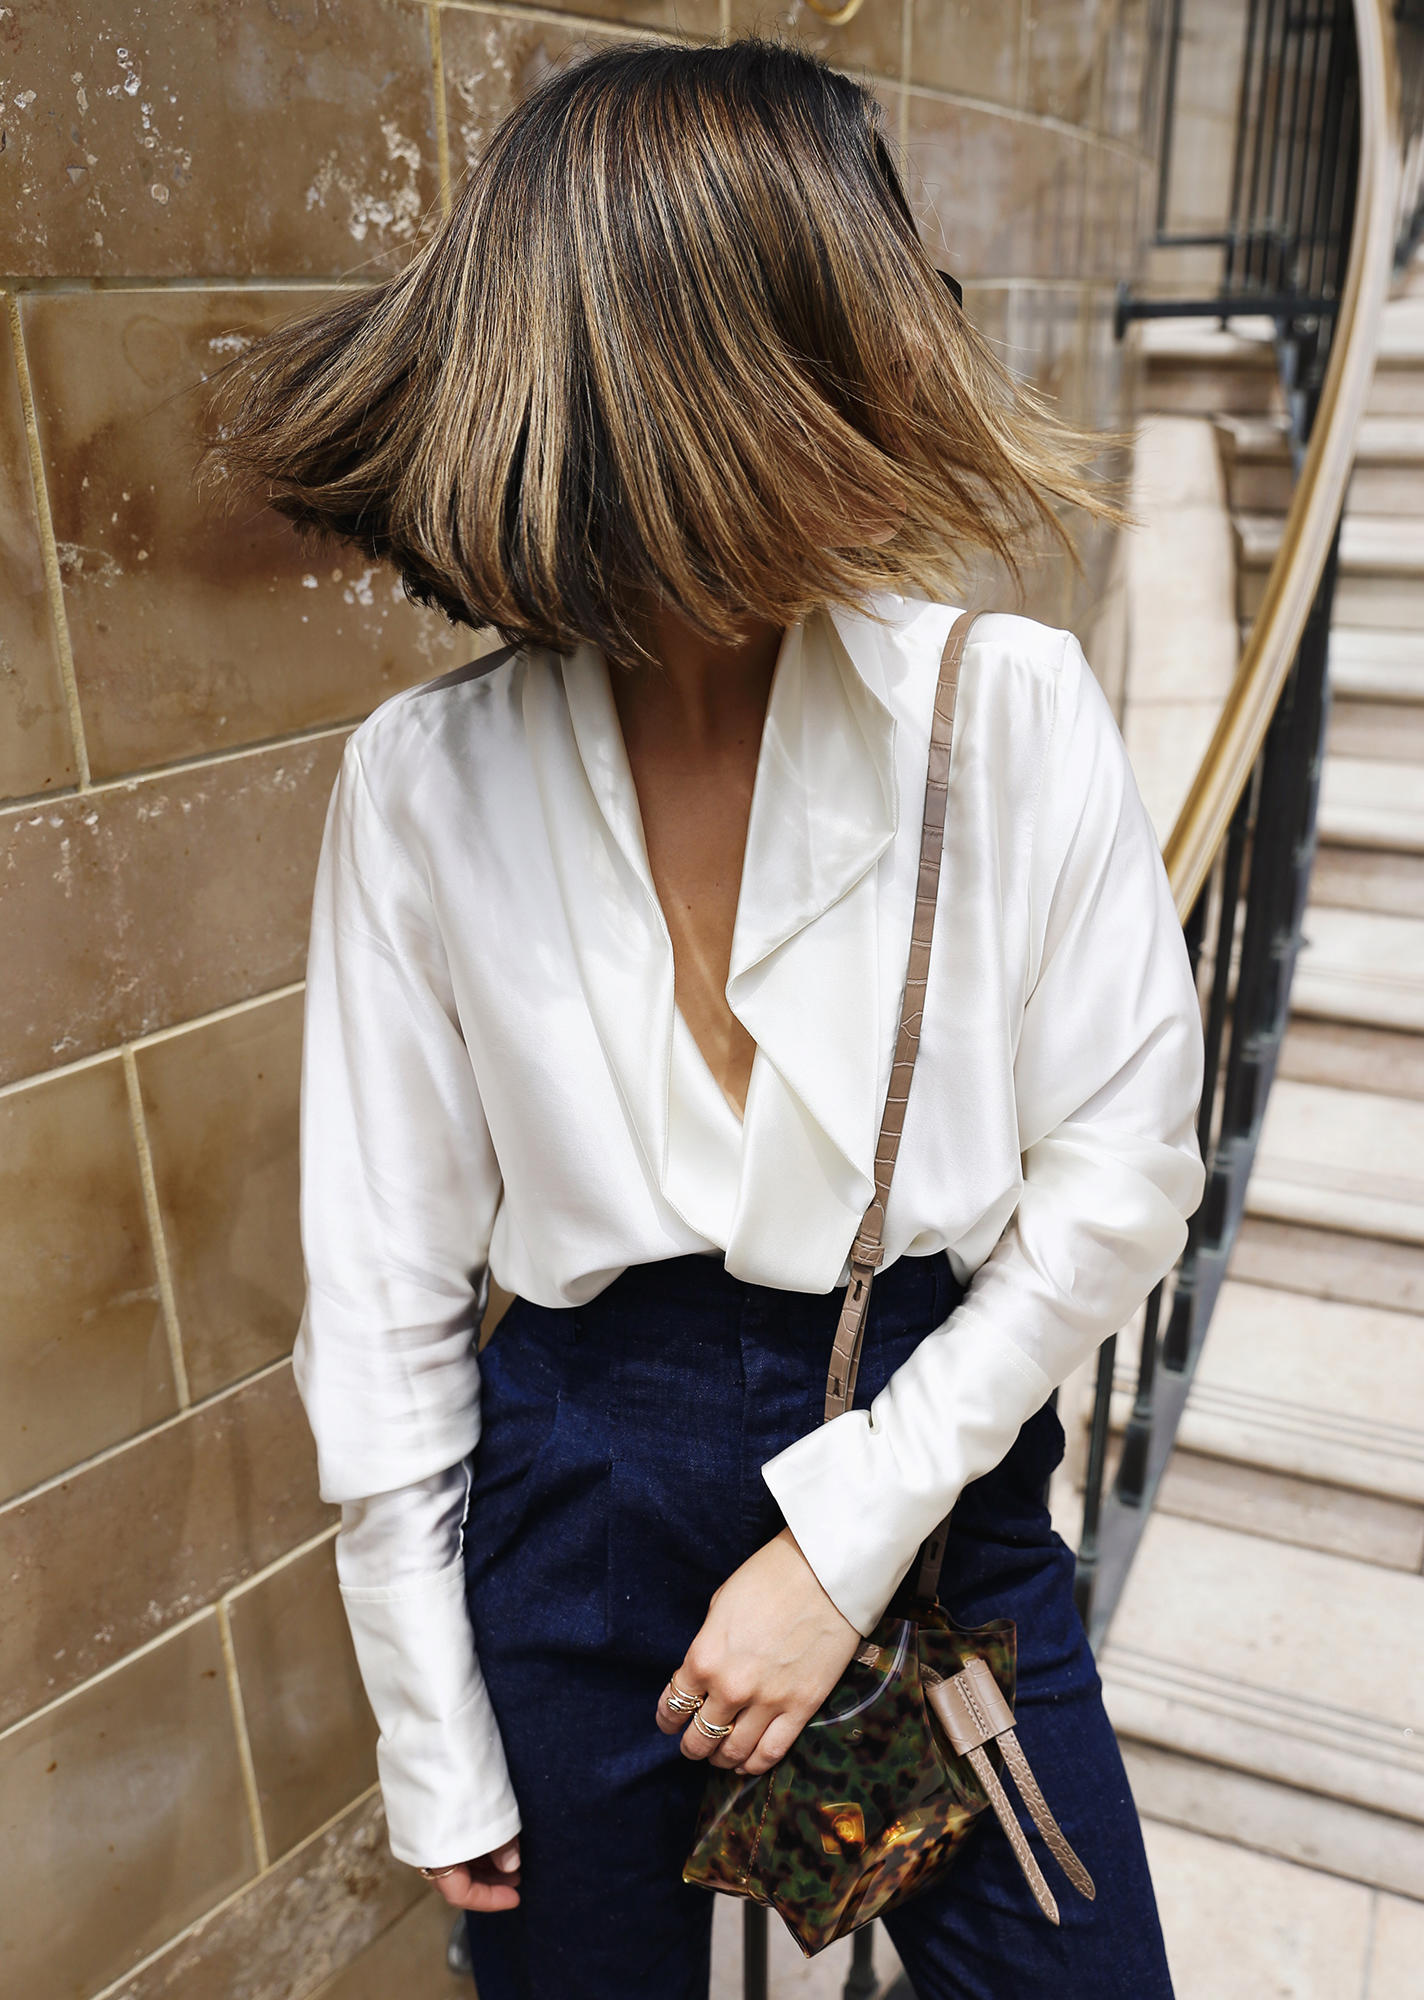 stylish white tops for summer, chic white tops, white blouse, chic blogger style, pam hetlinger style | the girl from panama